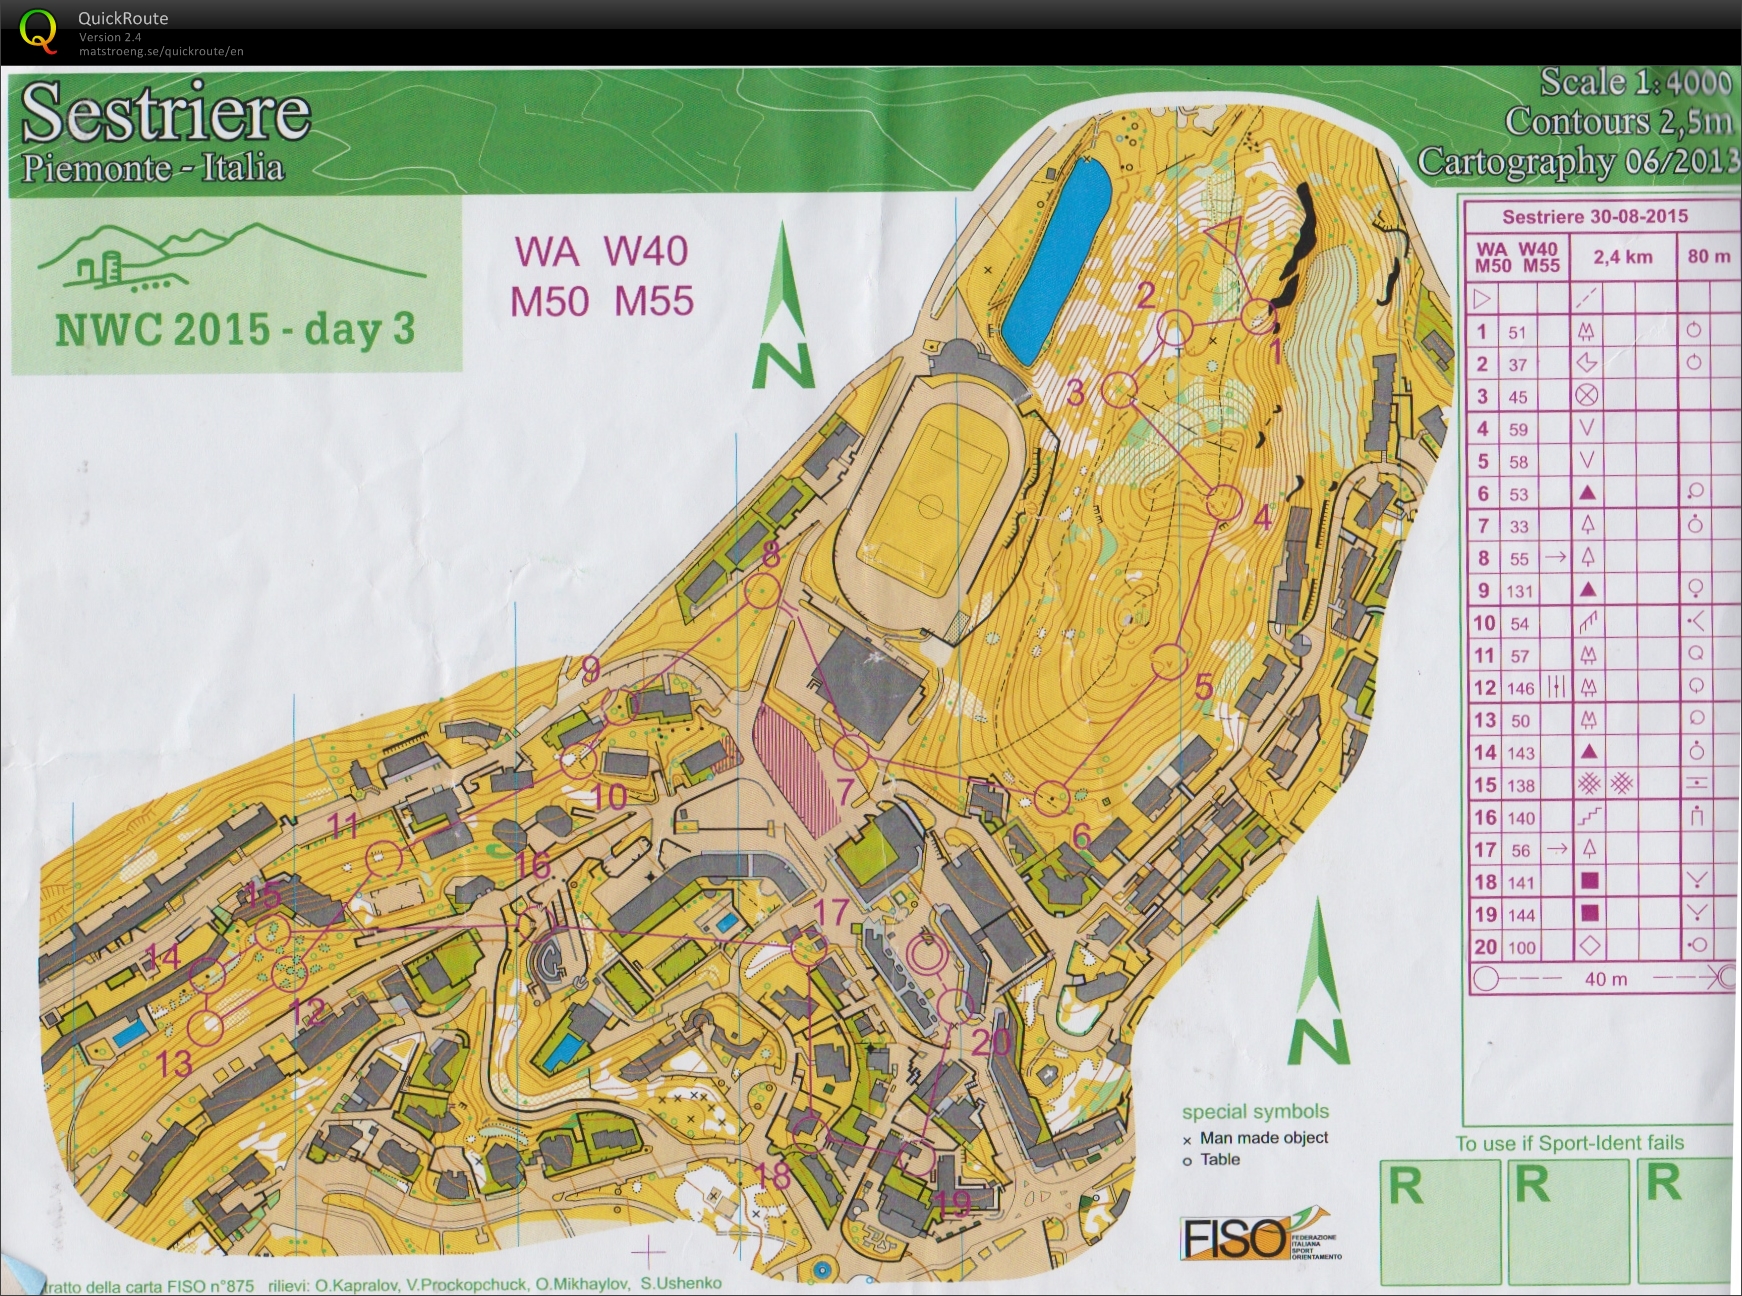 North west cup - Sestriere - Day 3 - M50 (30-08-2015)